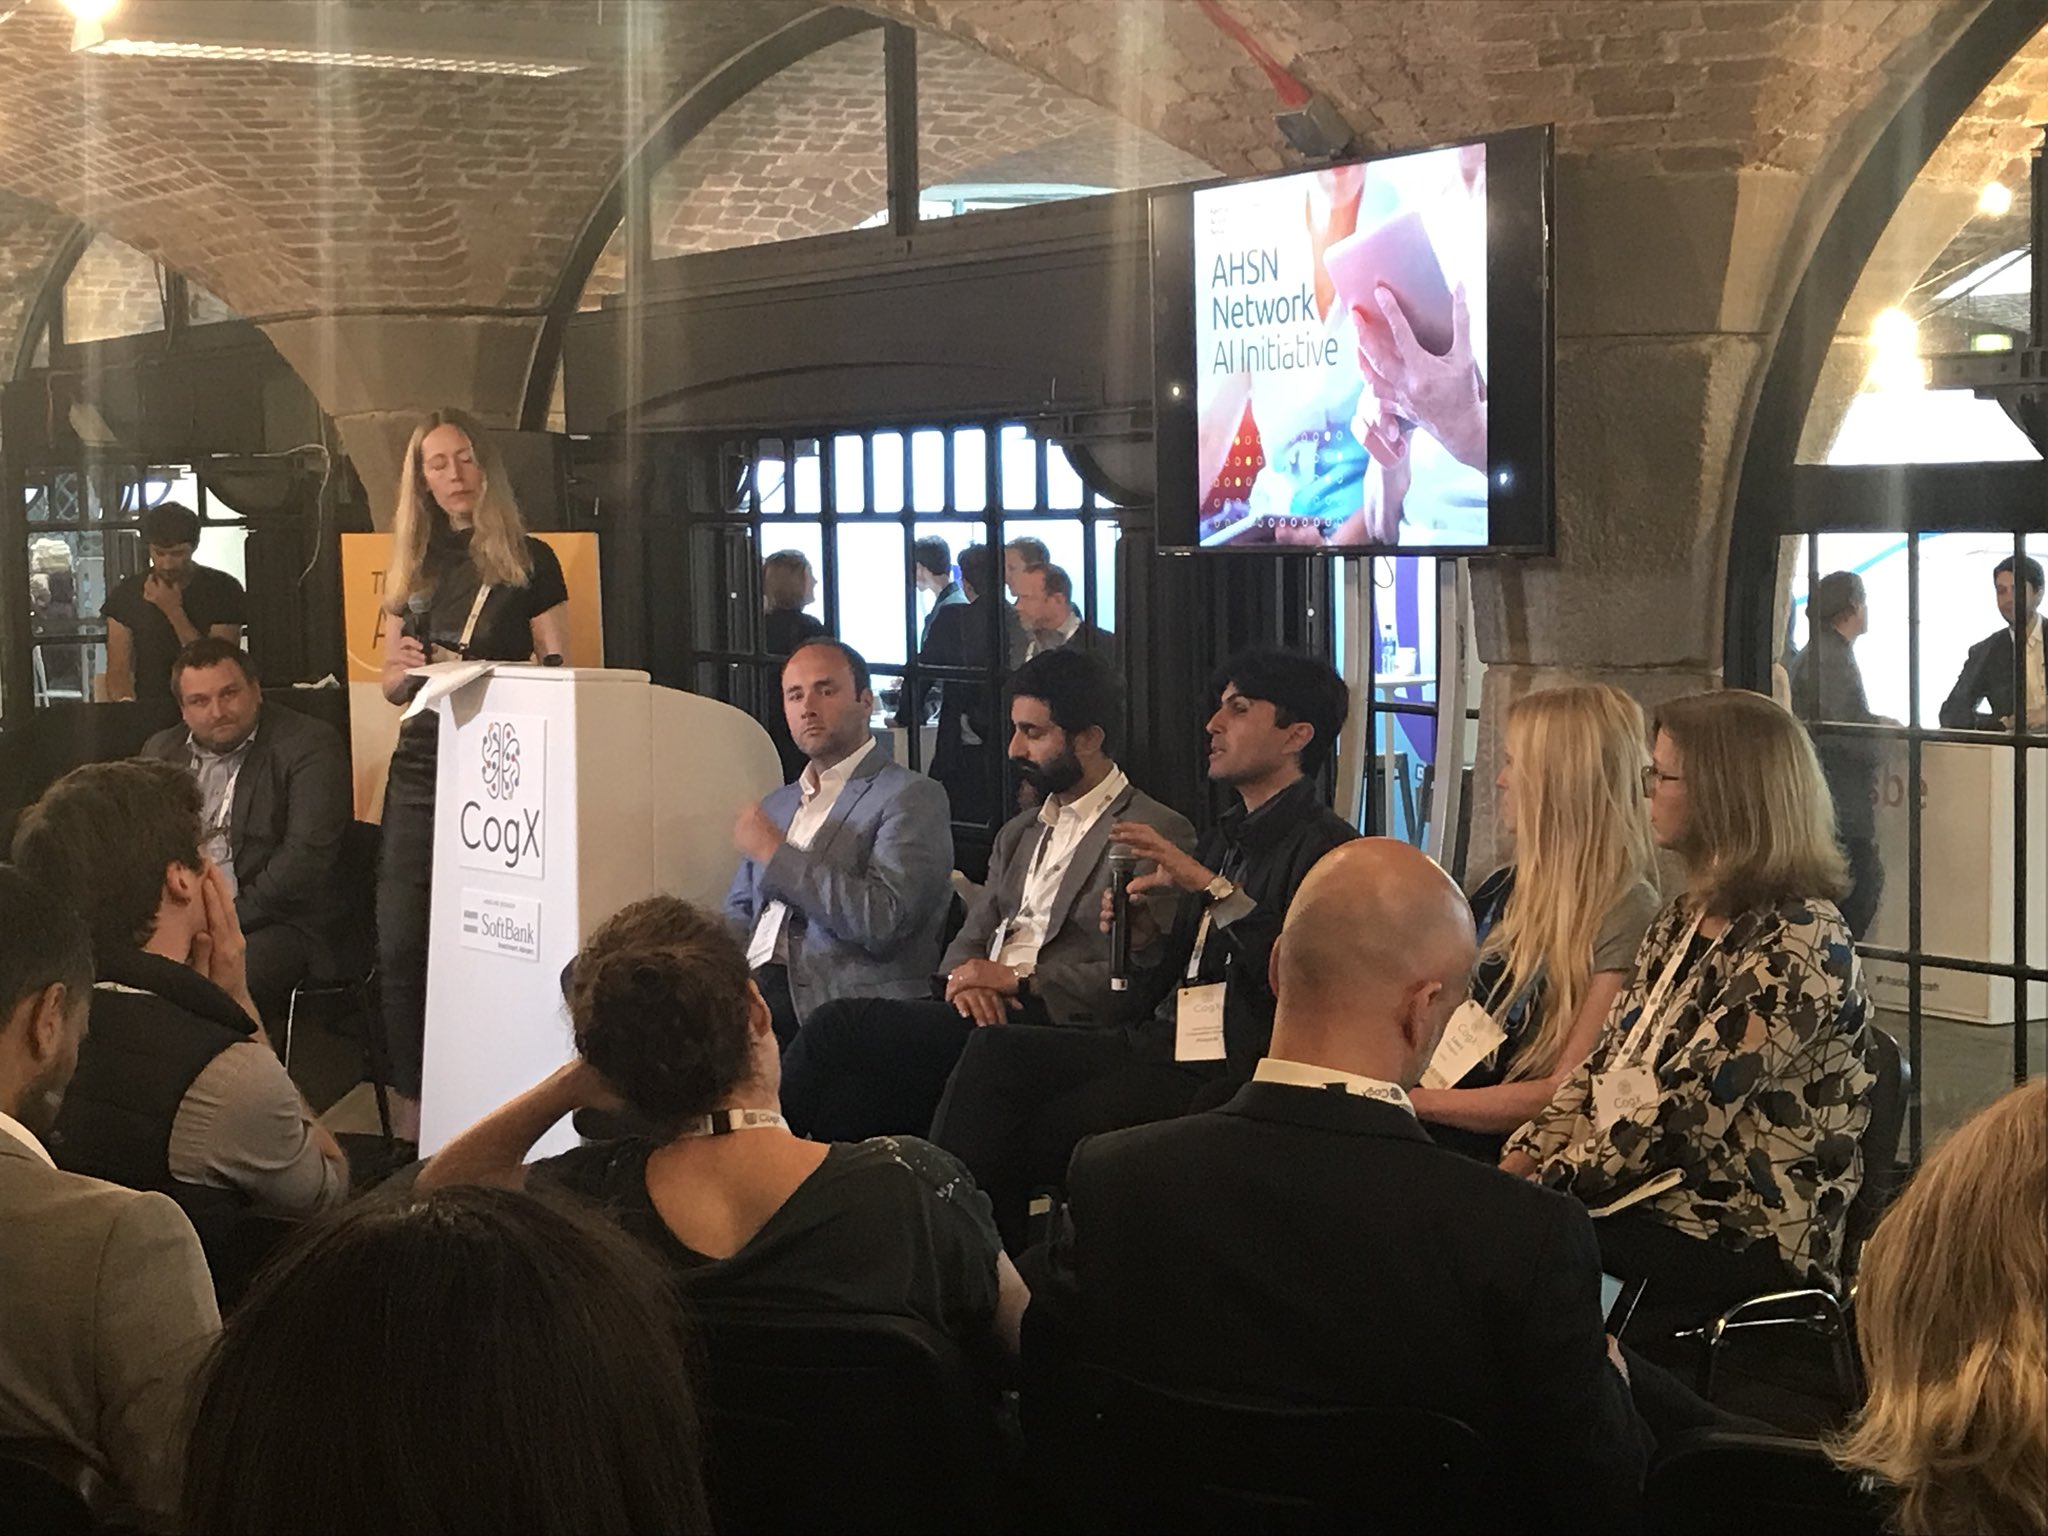   MOVING THE HYPE OF AI TO REAL WORLD IMPACT IN HEALTH    CogX AI Festival 10 &amp; 11 June 2018       Chair:  Tina Woods , CEO, Collier Health  Panellists:   Dr Hugh Harvey  (Clinical Director, Kheiron Medical; Topol Review Member and Co-Chair, Expe